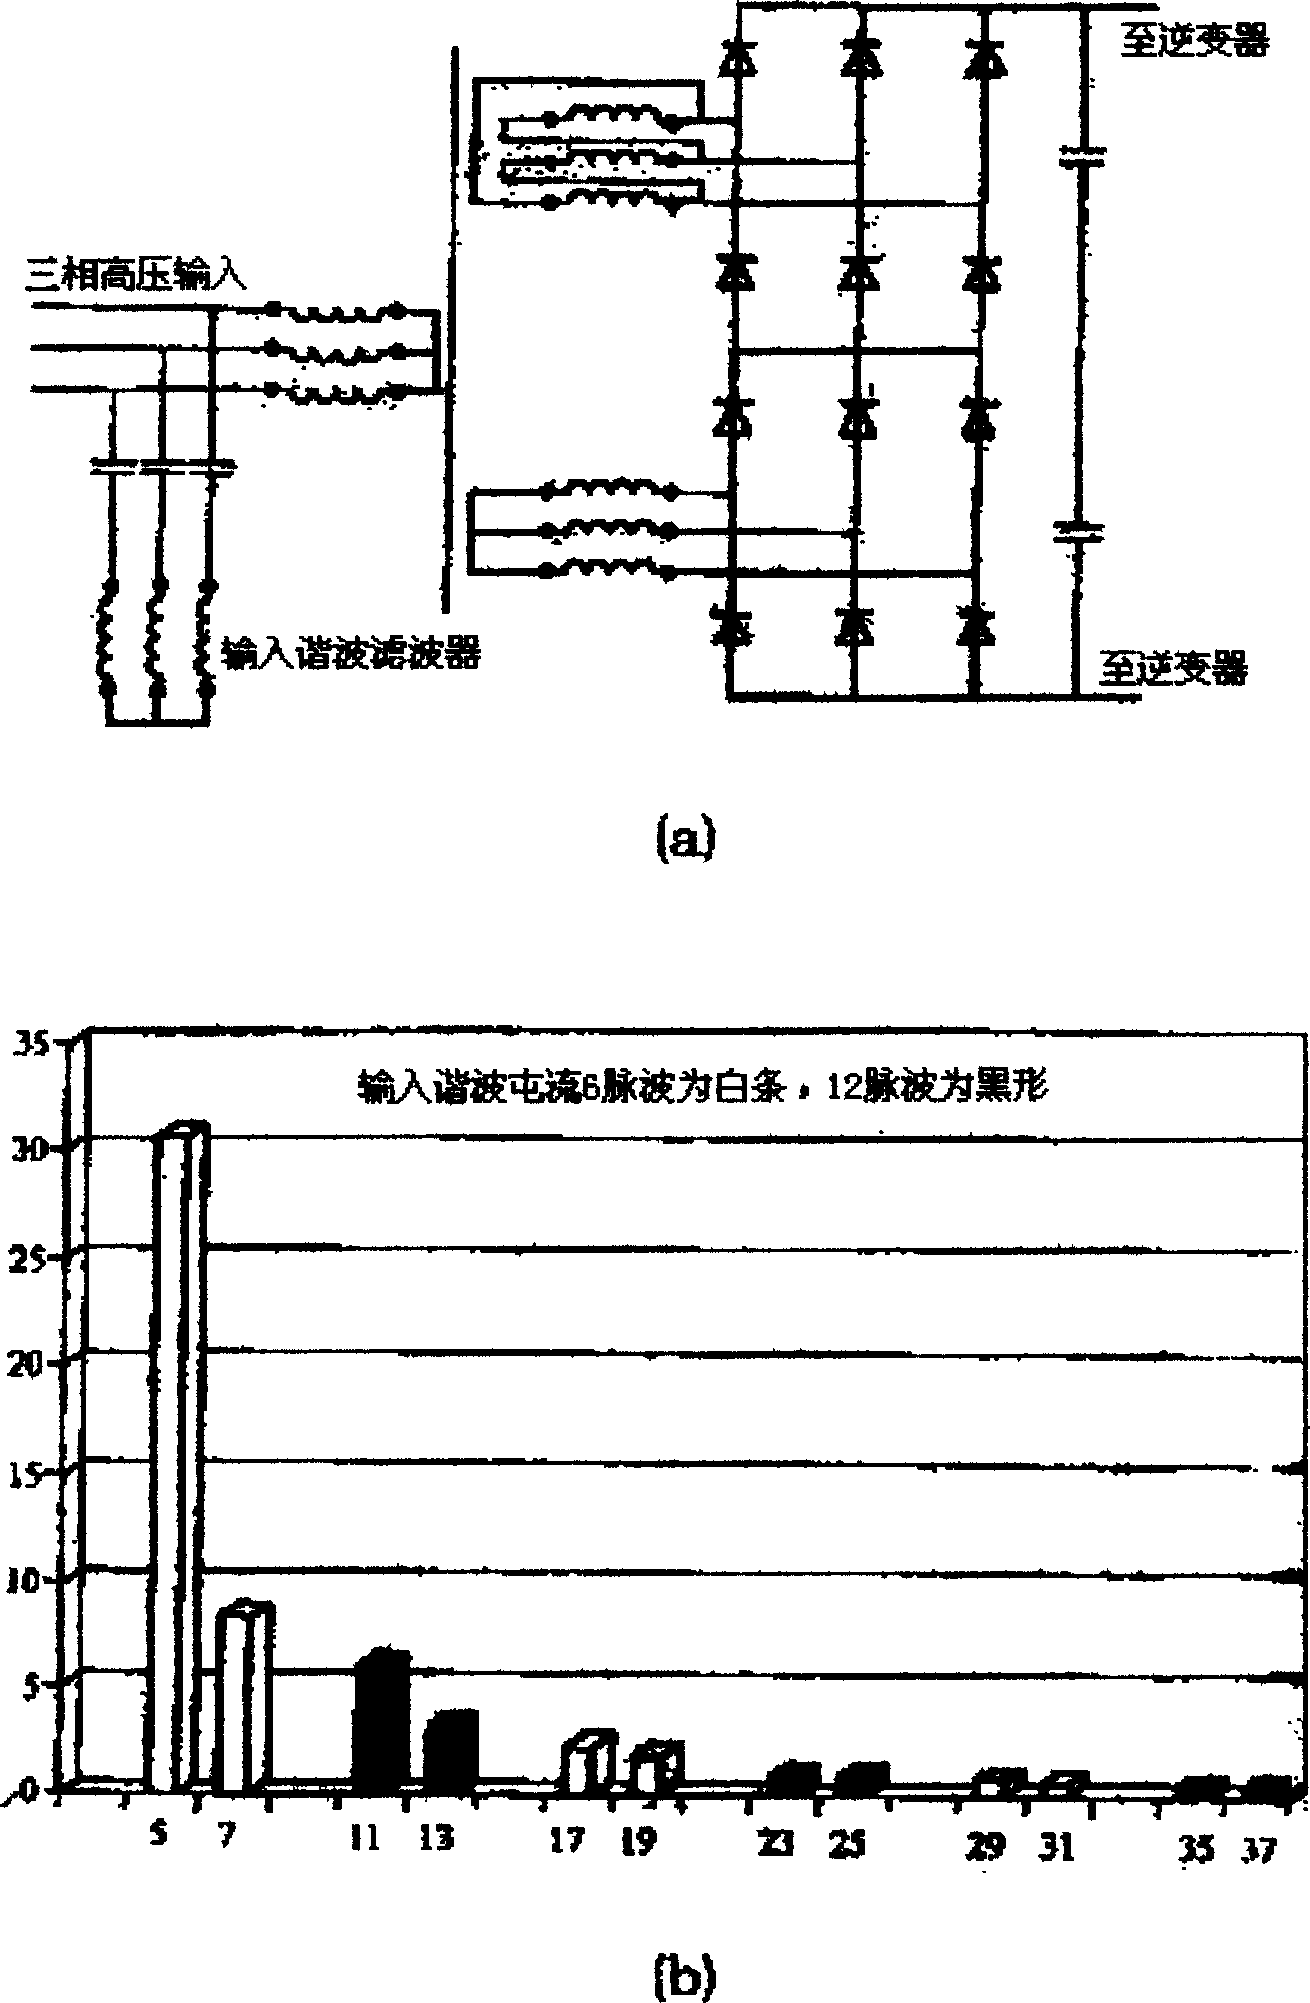 Three-phase split phase-shifting transformer for high-voltage frequency conversion and its use